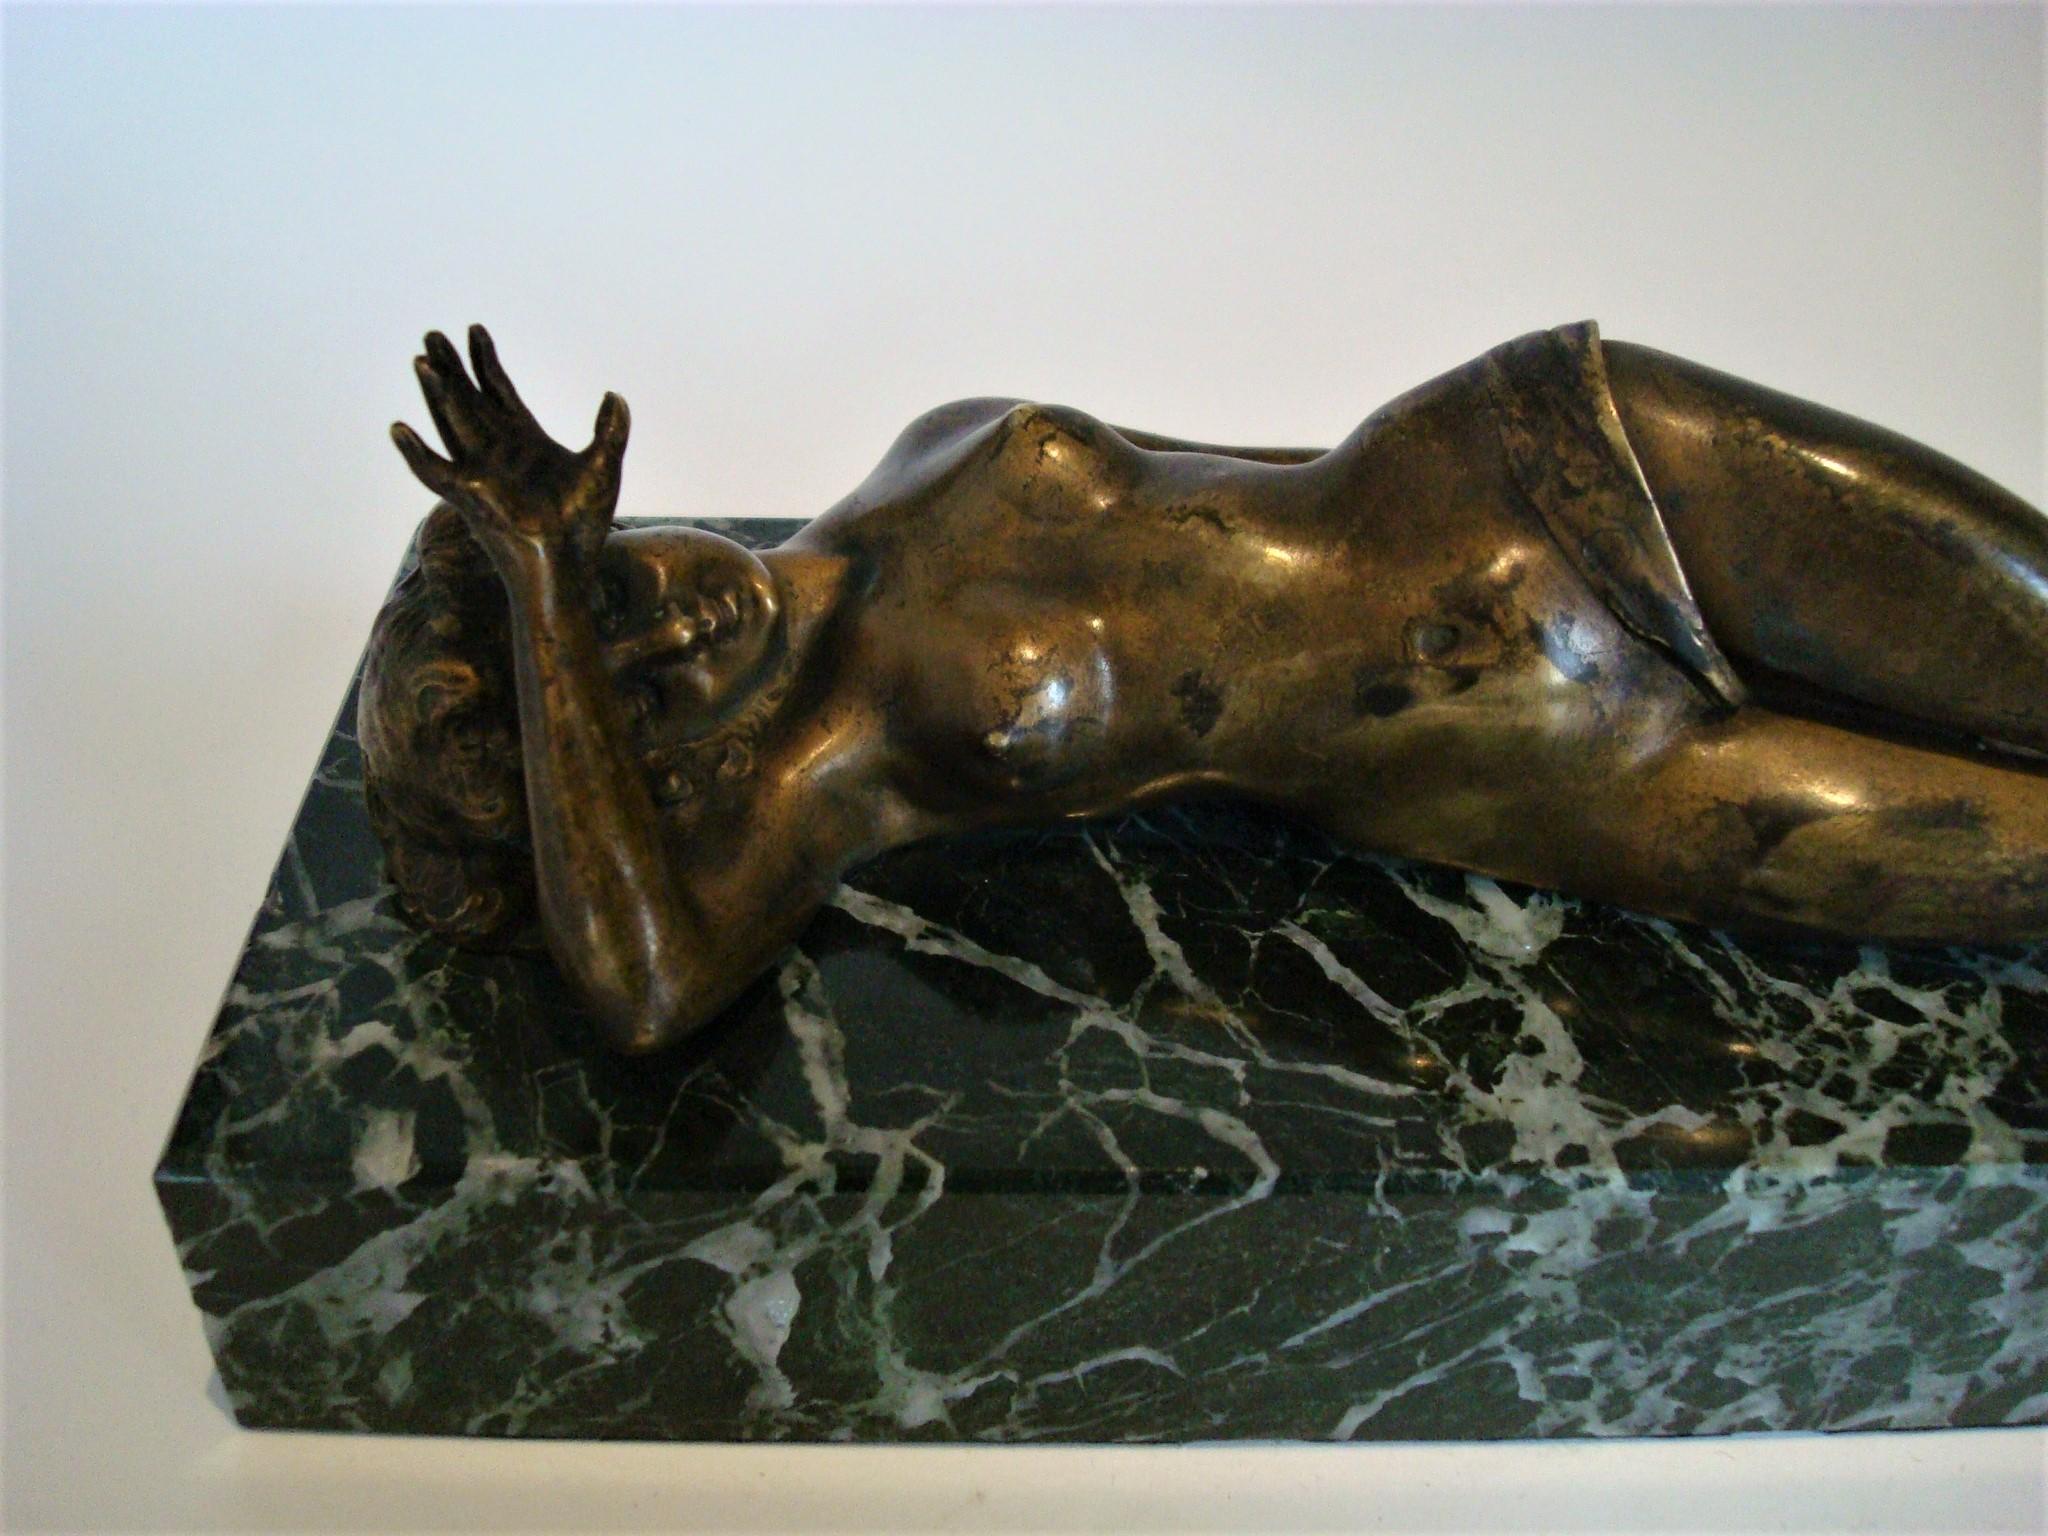 Antique naughty cigar cutter - Carl Kauba
Erotic bronze lady figure cigar cutter on marble base - open & close legs to cut cigar.
Signed by the great Austrian artist Carl Kauba (1865-1922). Kauba is known for his unusual and well done bronze